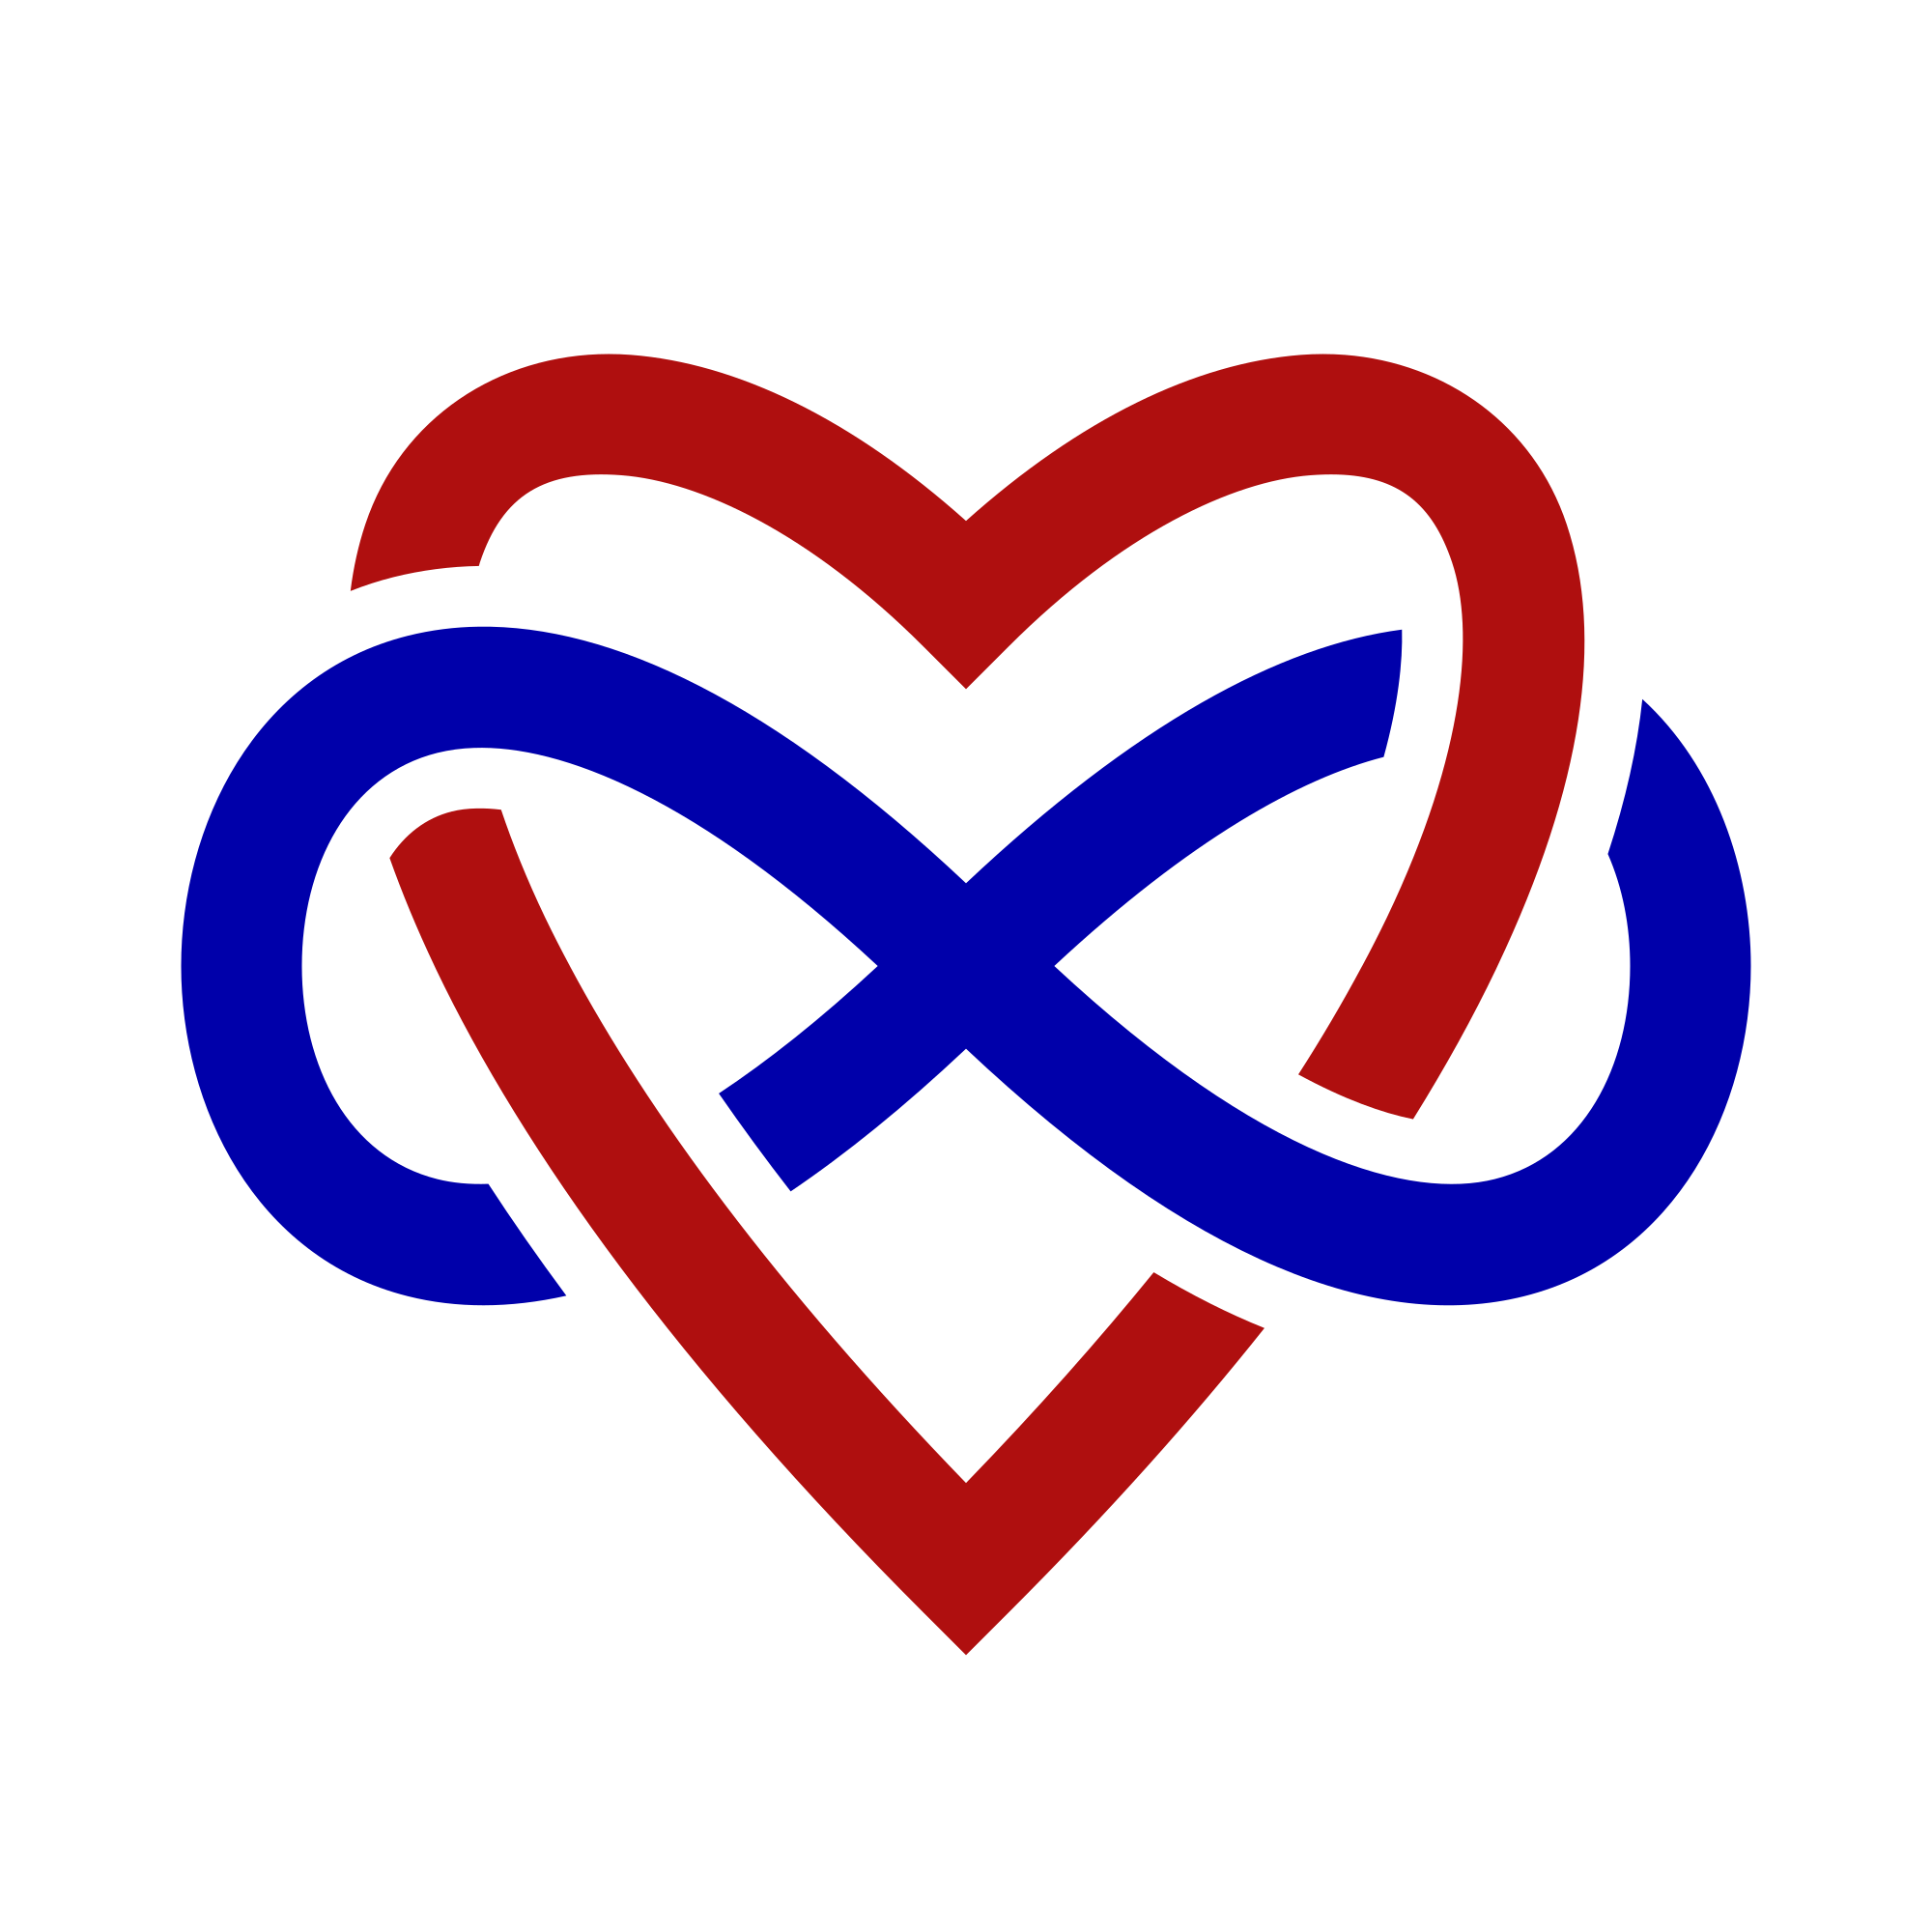 A read heart entwined with a blue infinity symbol.